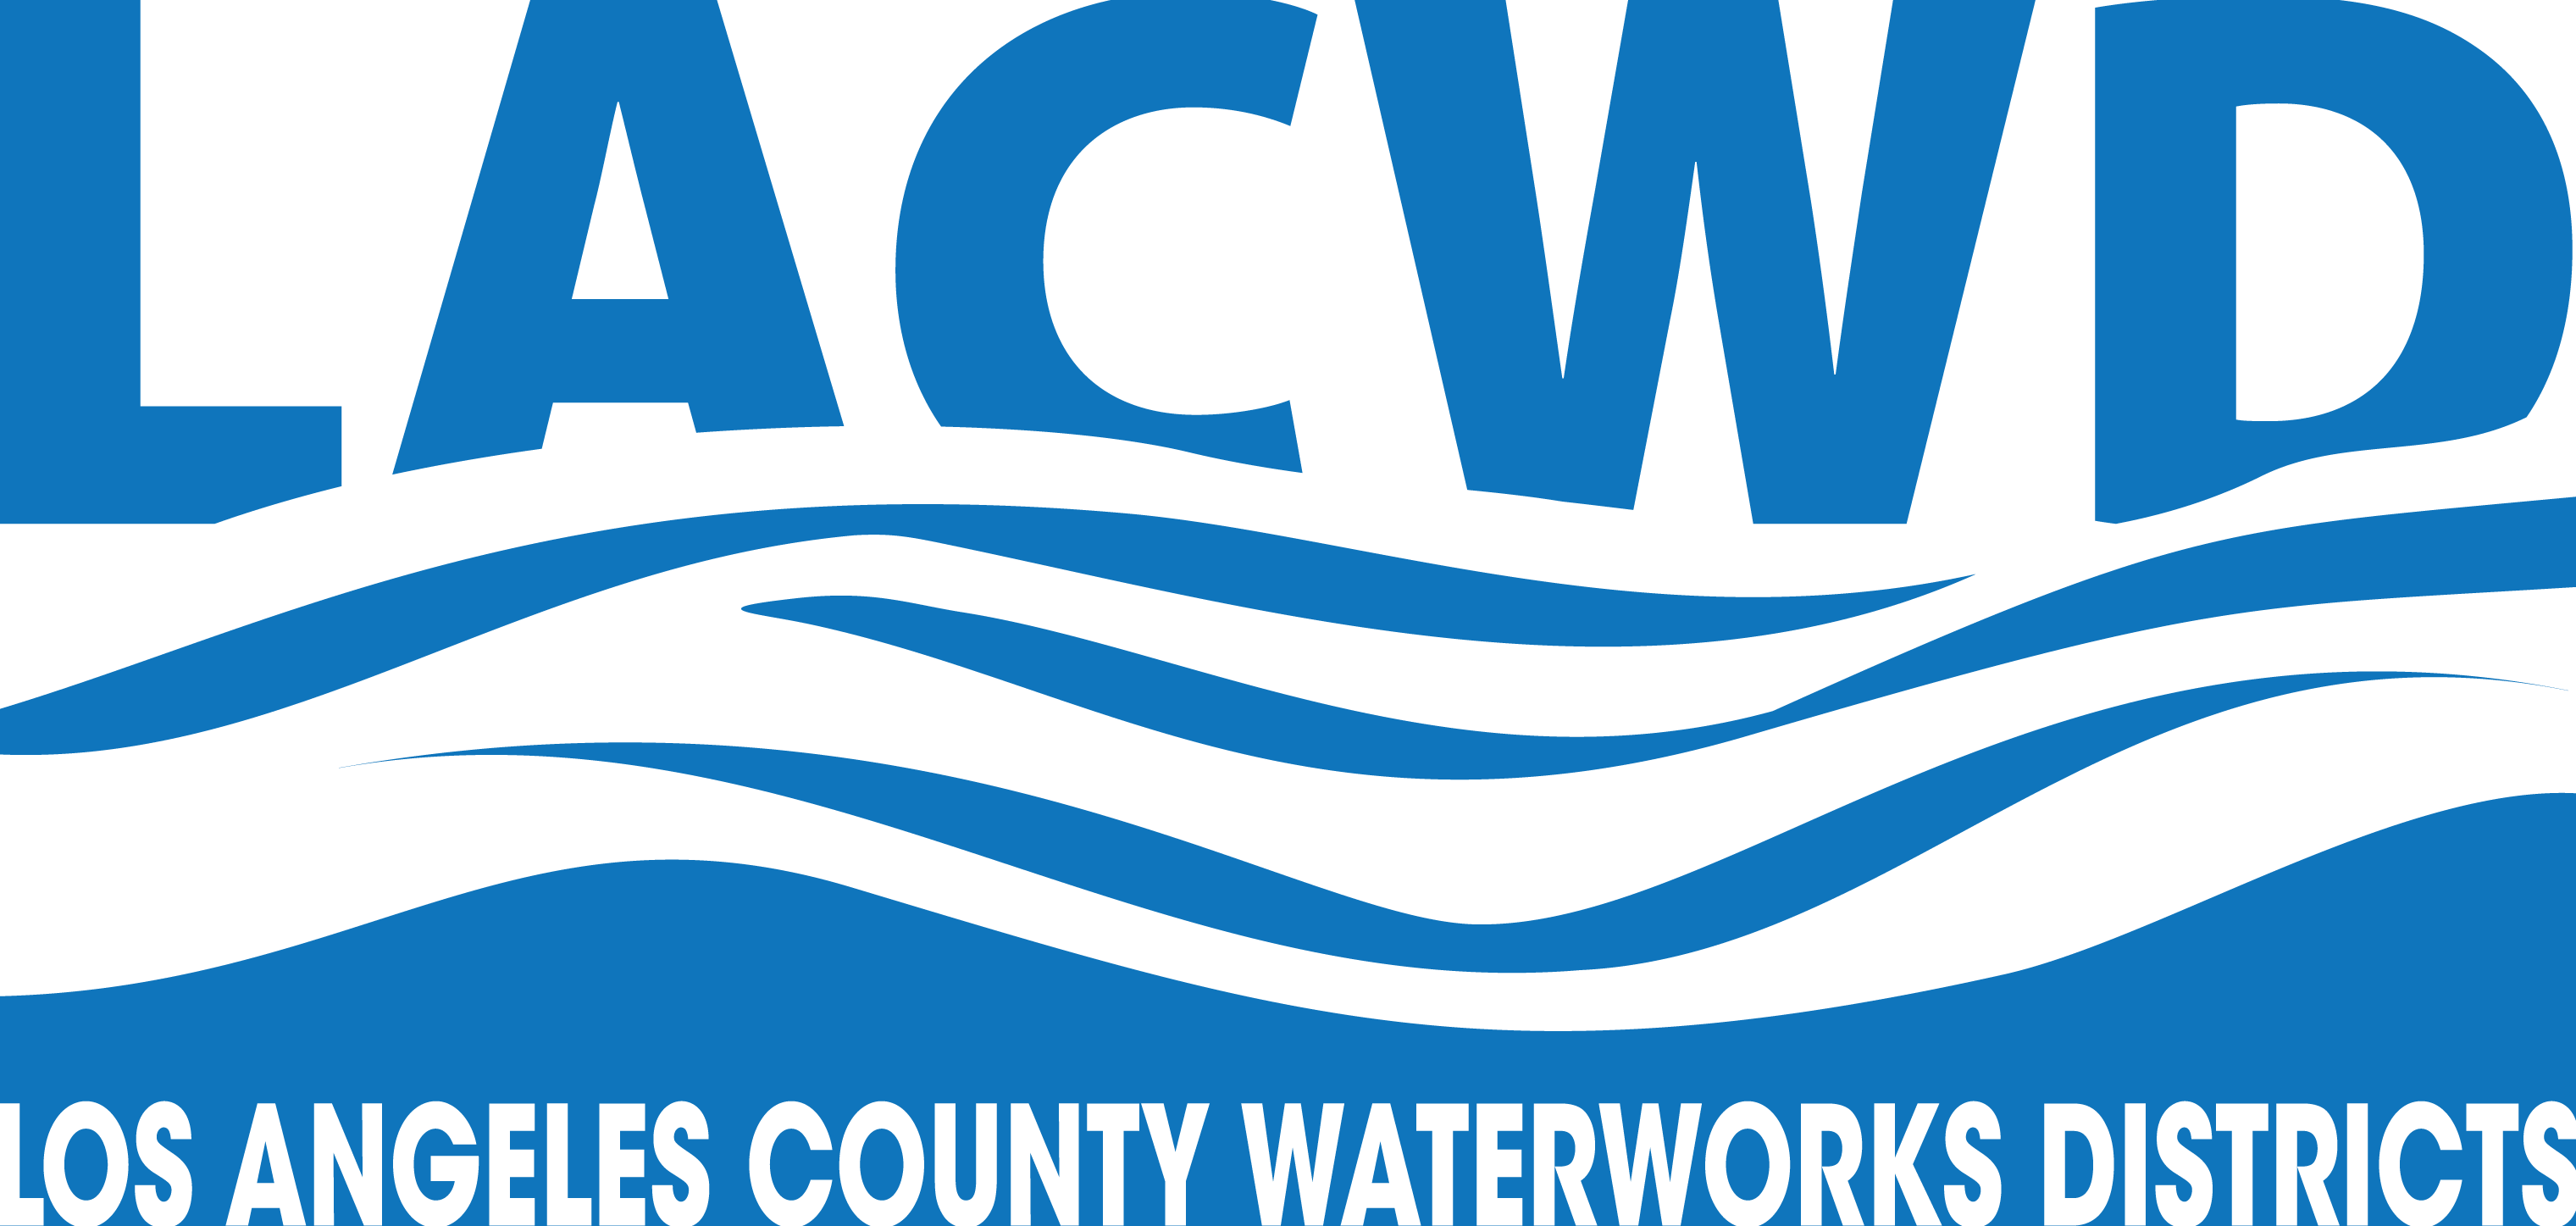 Los Angeles County Waterworks Districts logo consisting of the initials LACWD above blue waves.